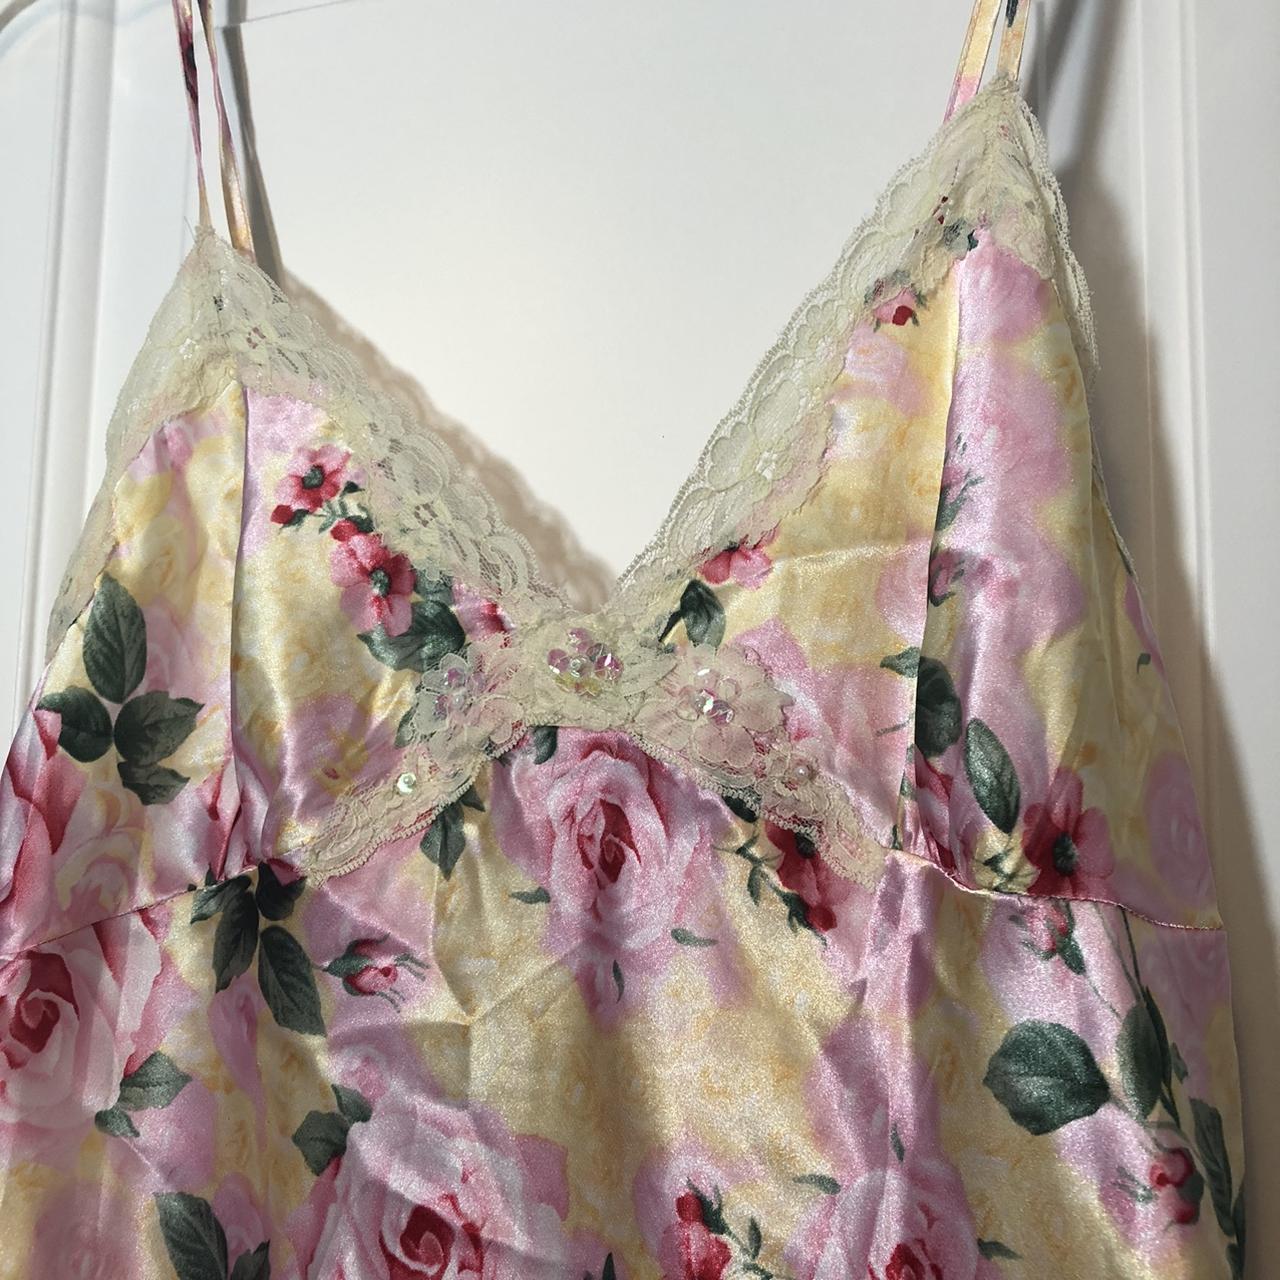 Product Image 2 - pink floral slip dress 💕

in